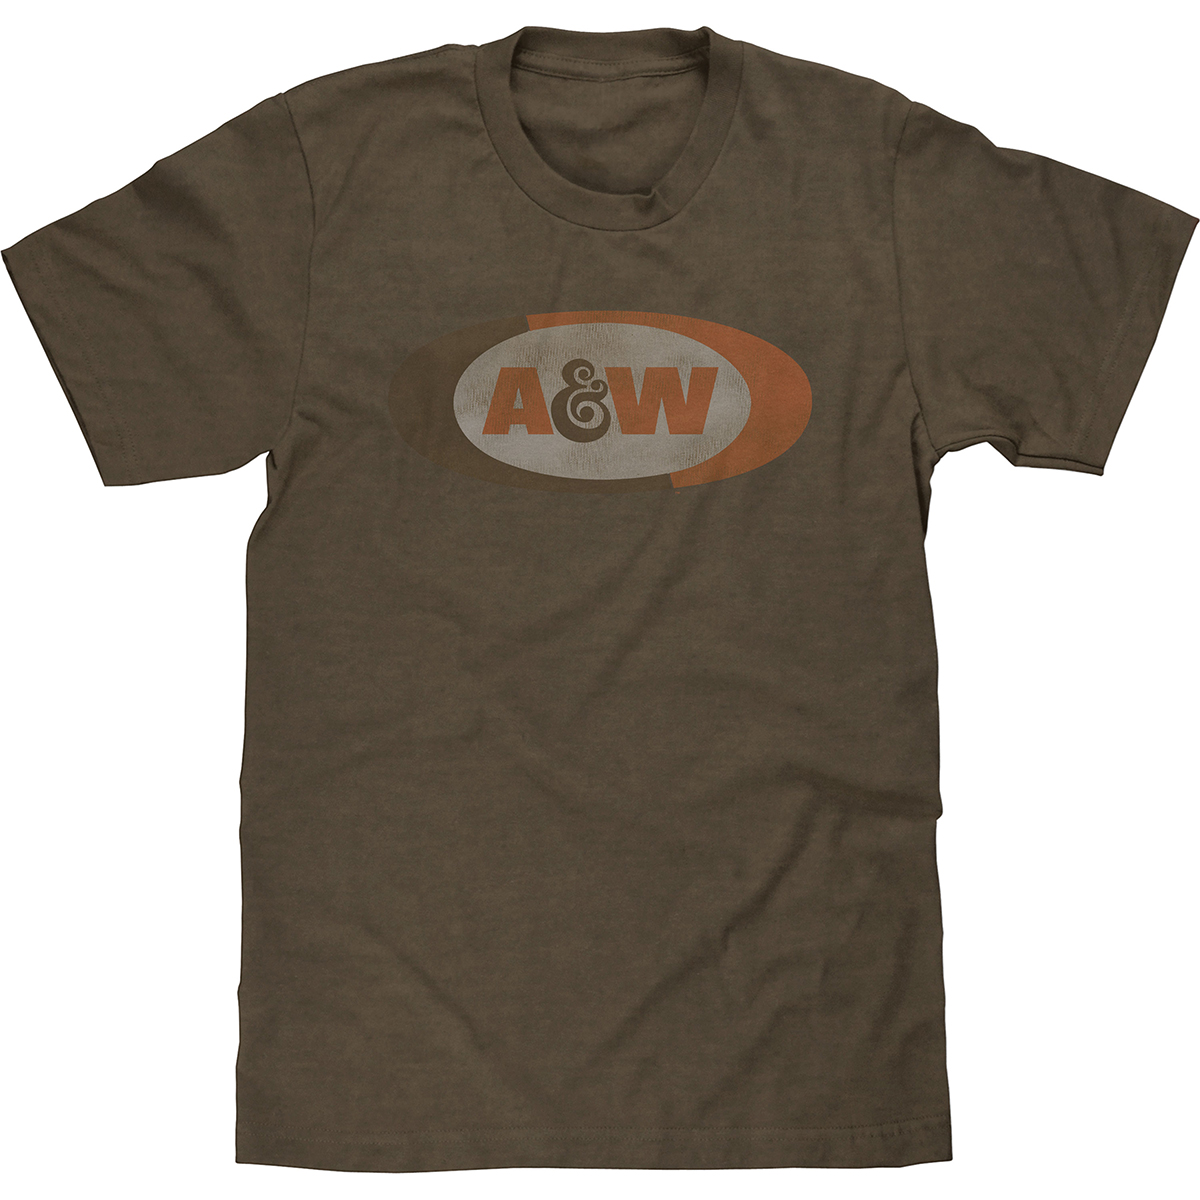 A&w Rootbeer Young Men's Short-Sleeve Graphic Tee